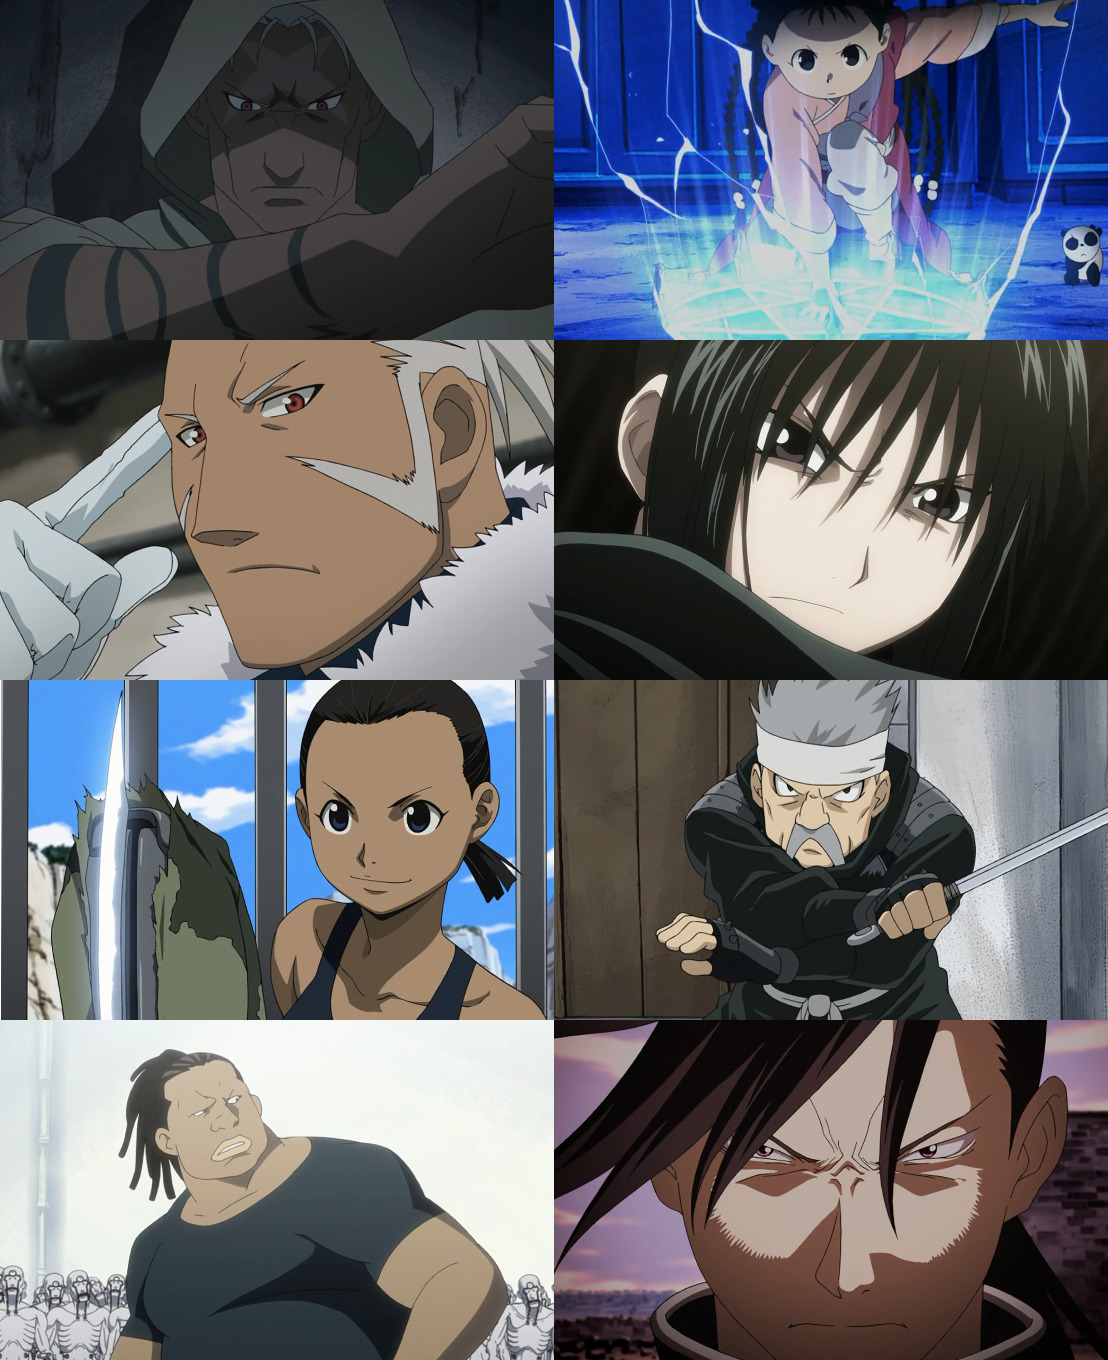  Often in the fantasy genre, especially in animanga works, the casts consist of either